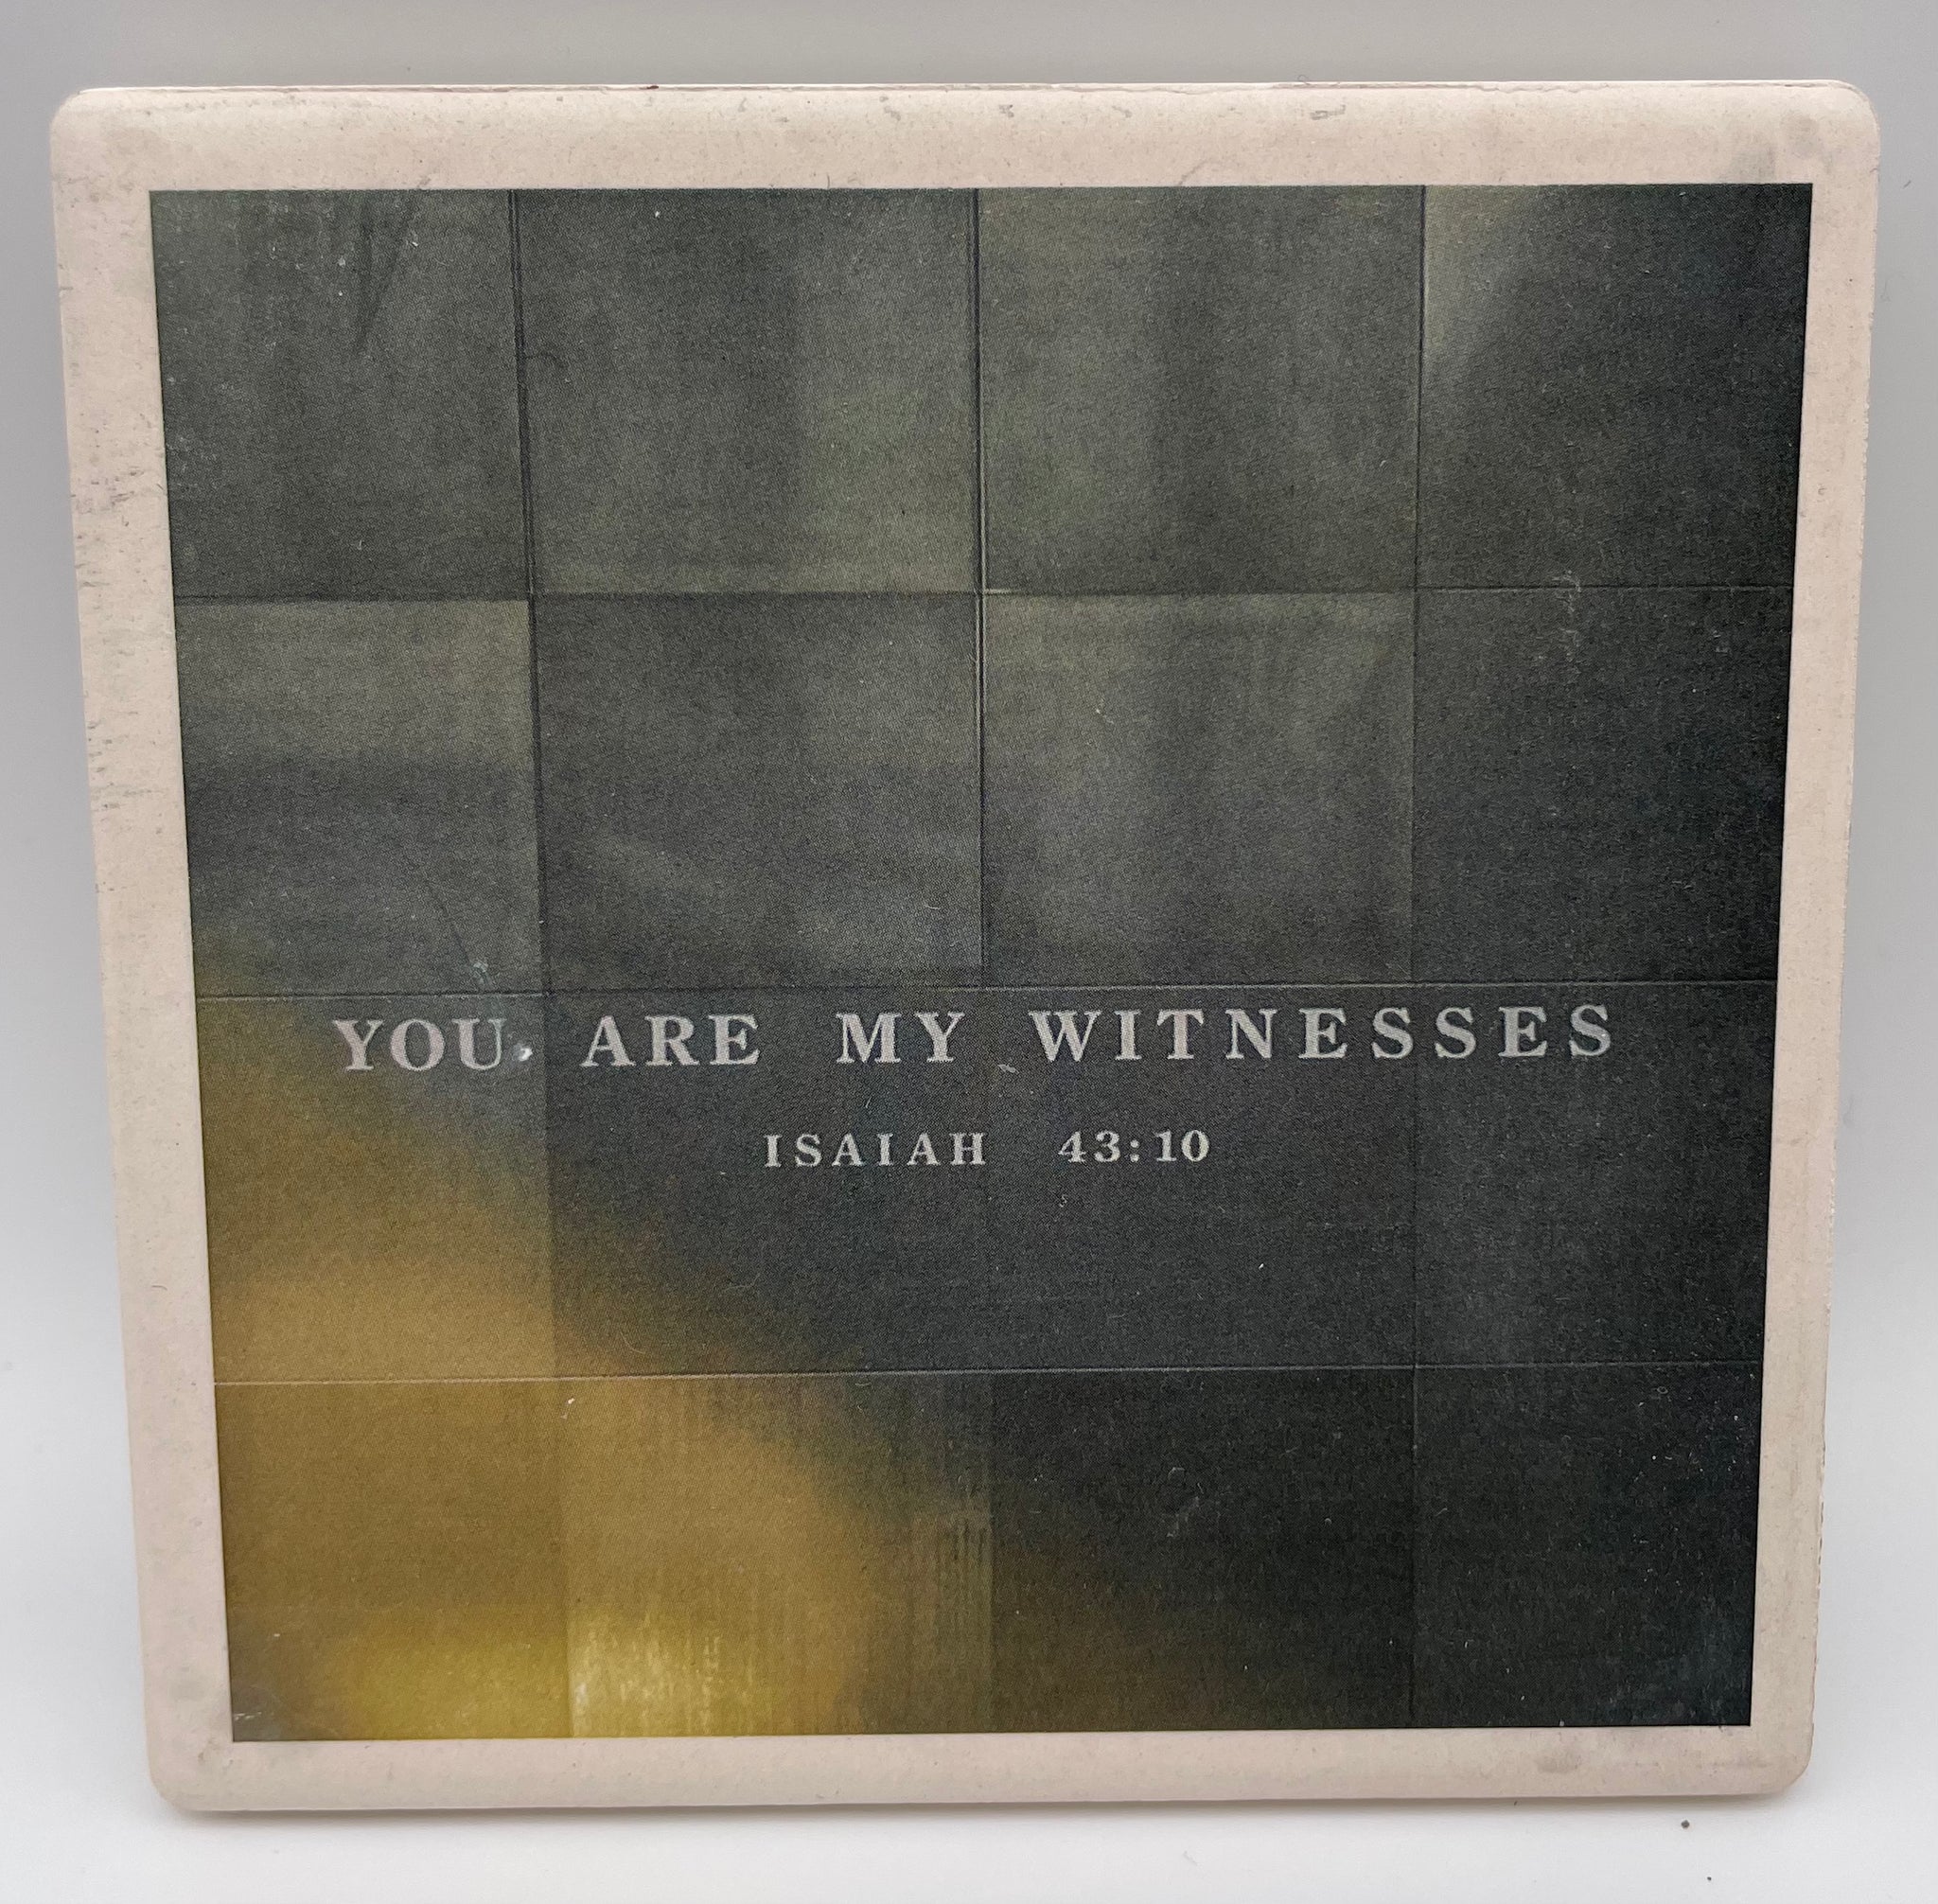 "You Are My Witnesses" Coaster Tile